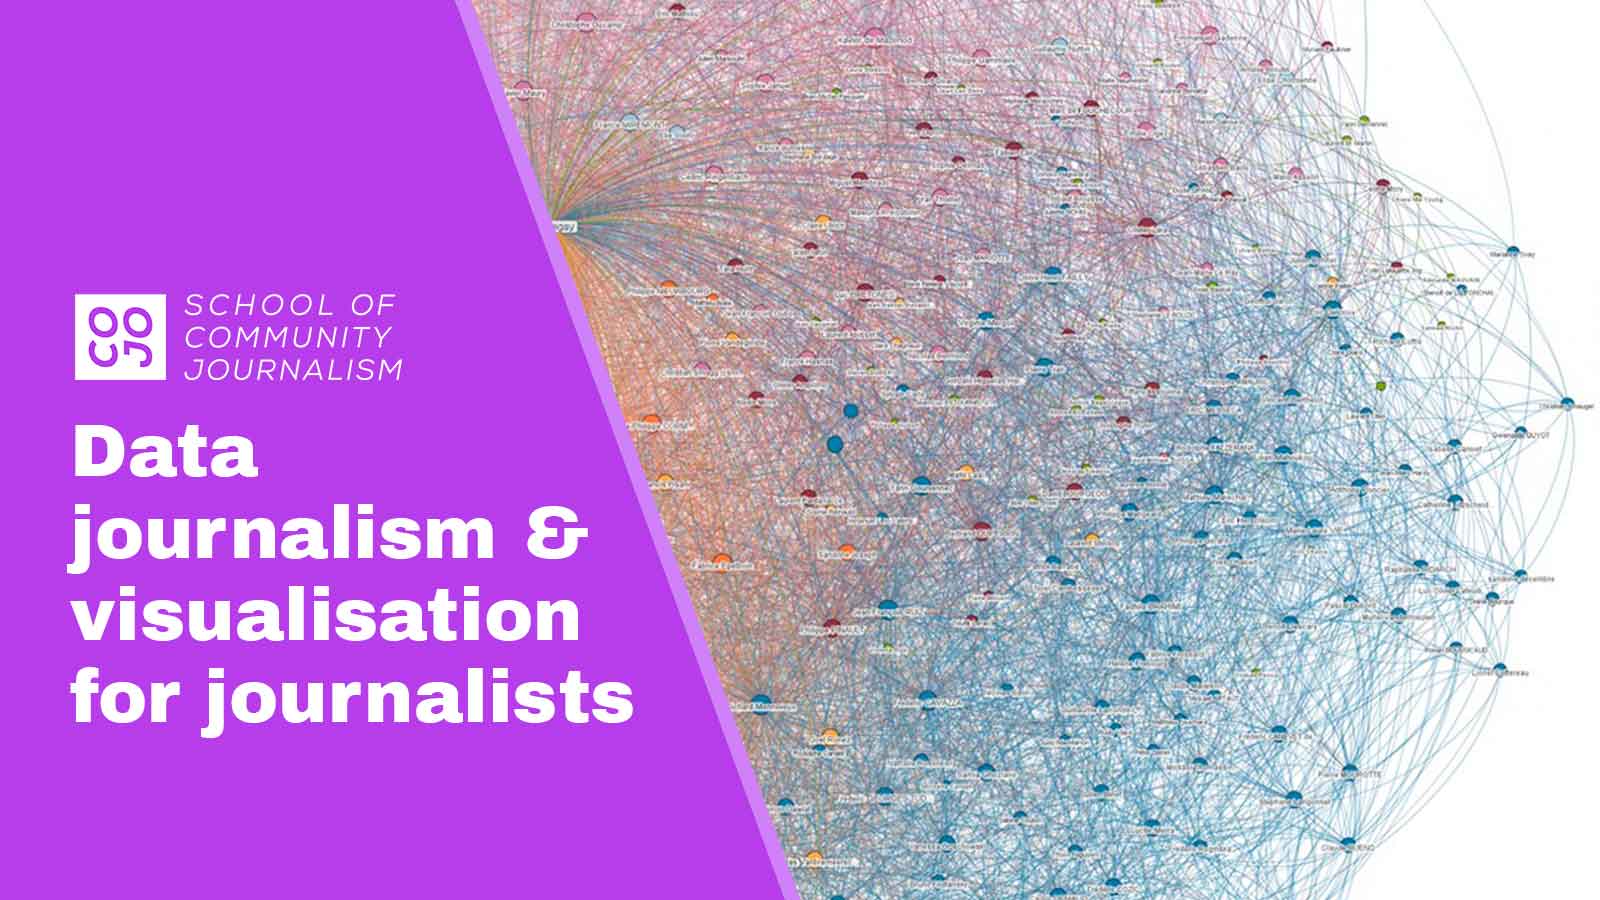 Data journalism and visualisation for journalists